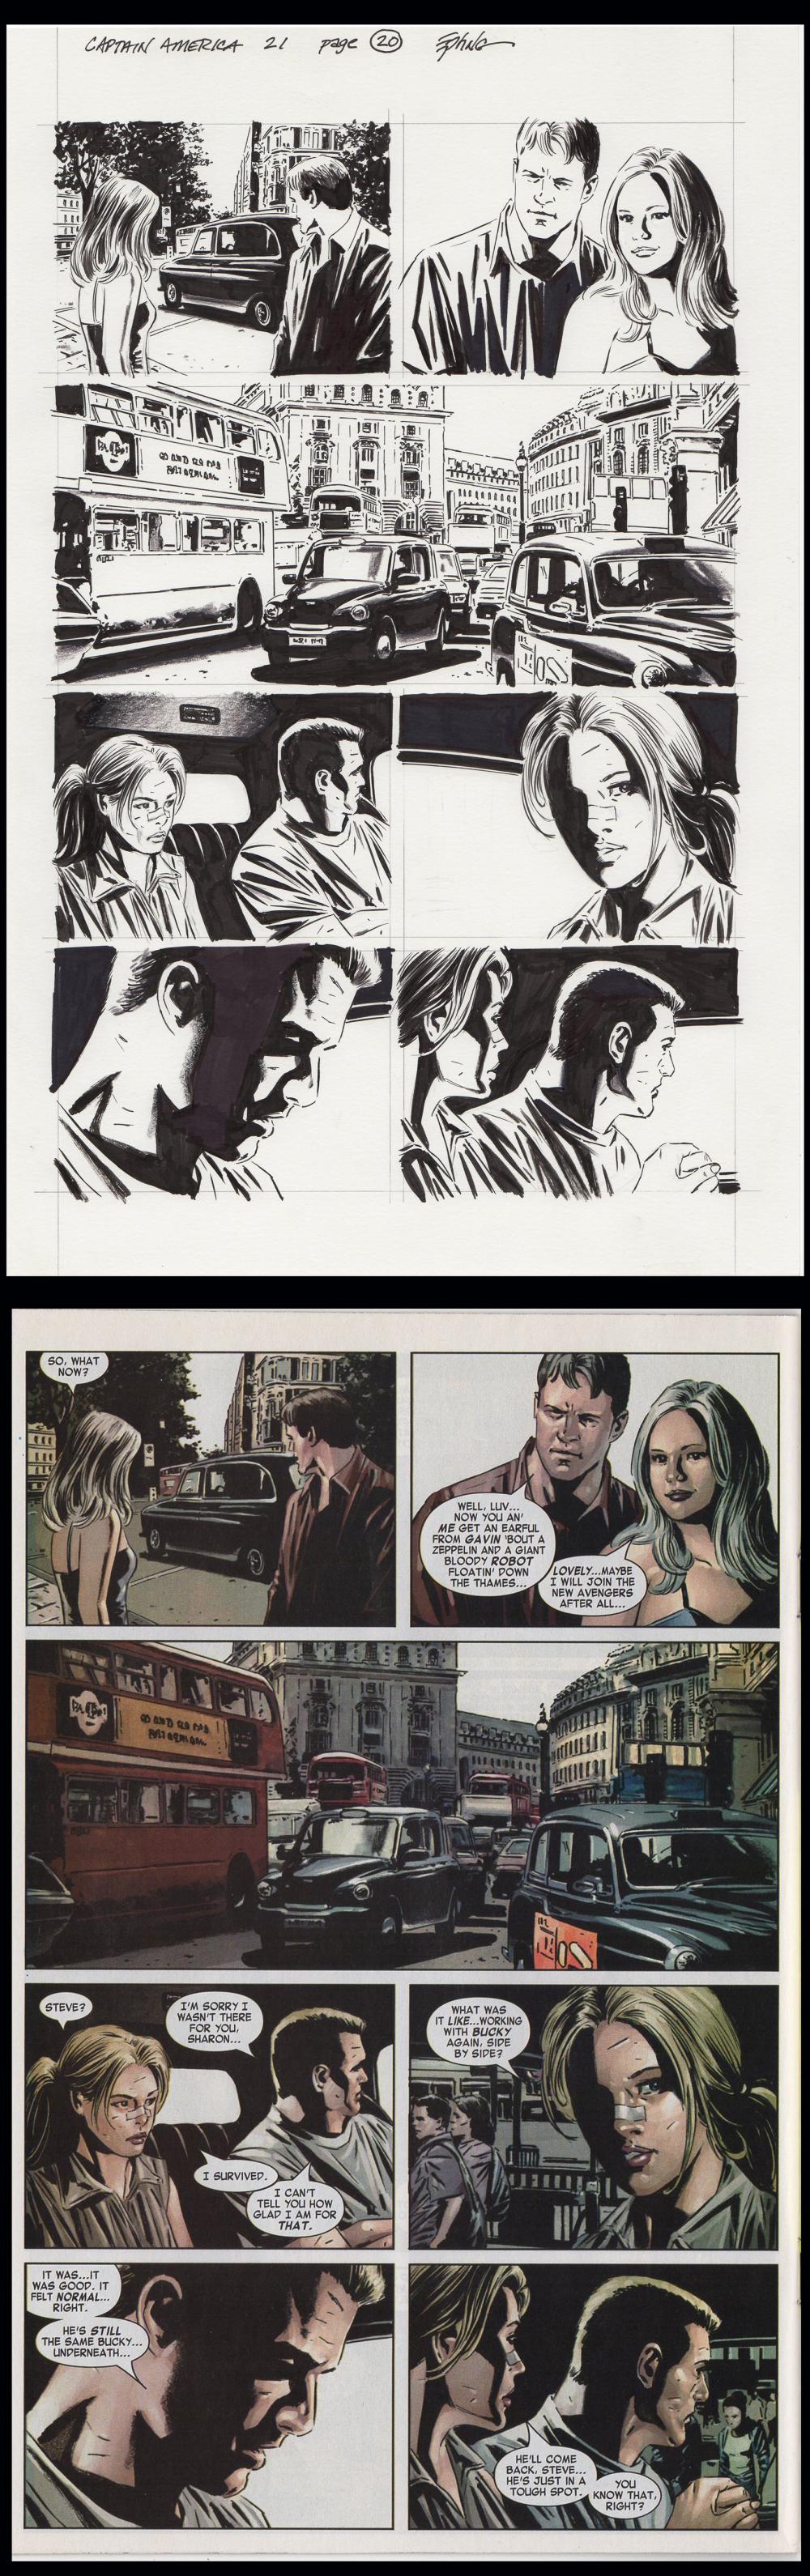 Image: Captain America Vol 5 #21 page 20 art by Steve Epting